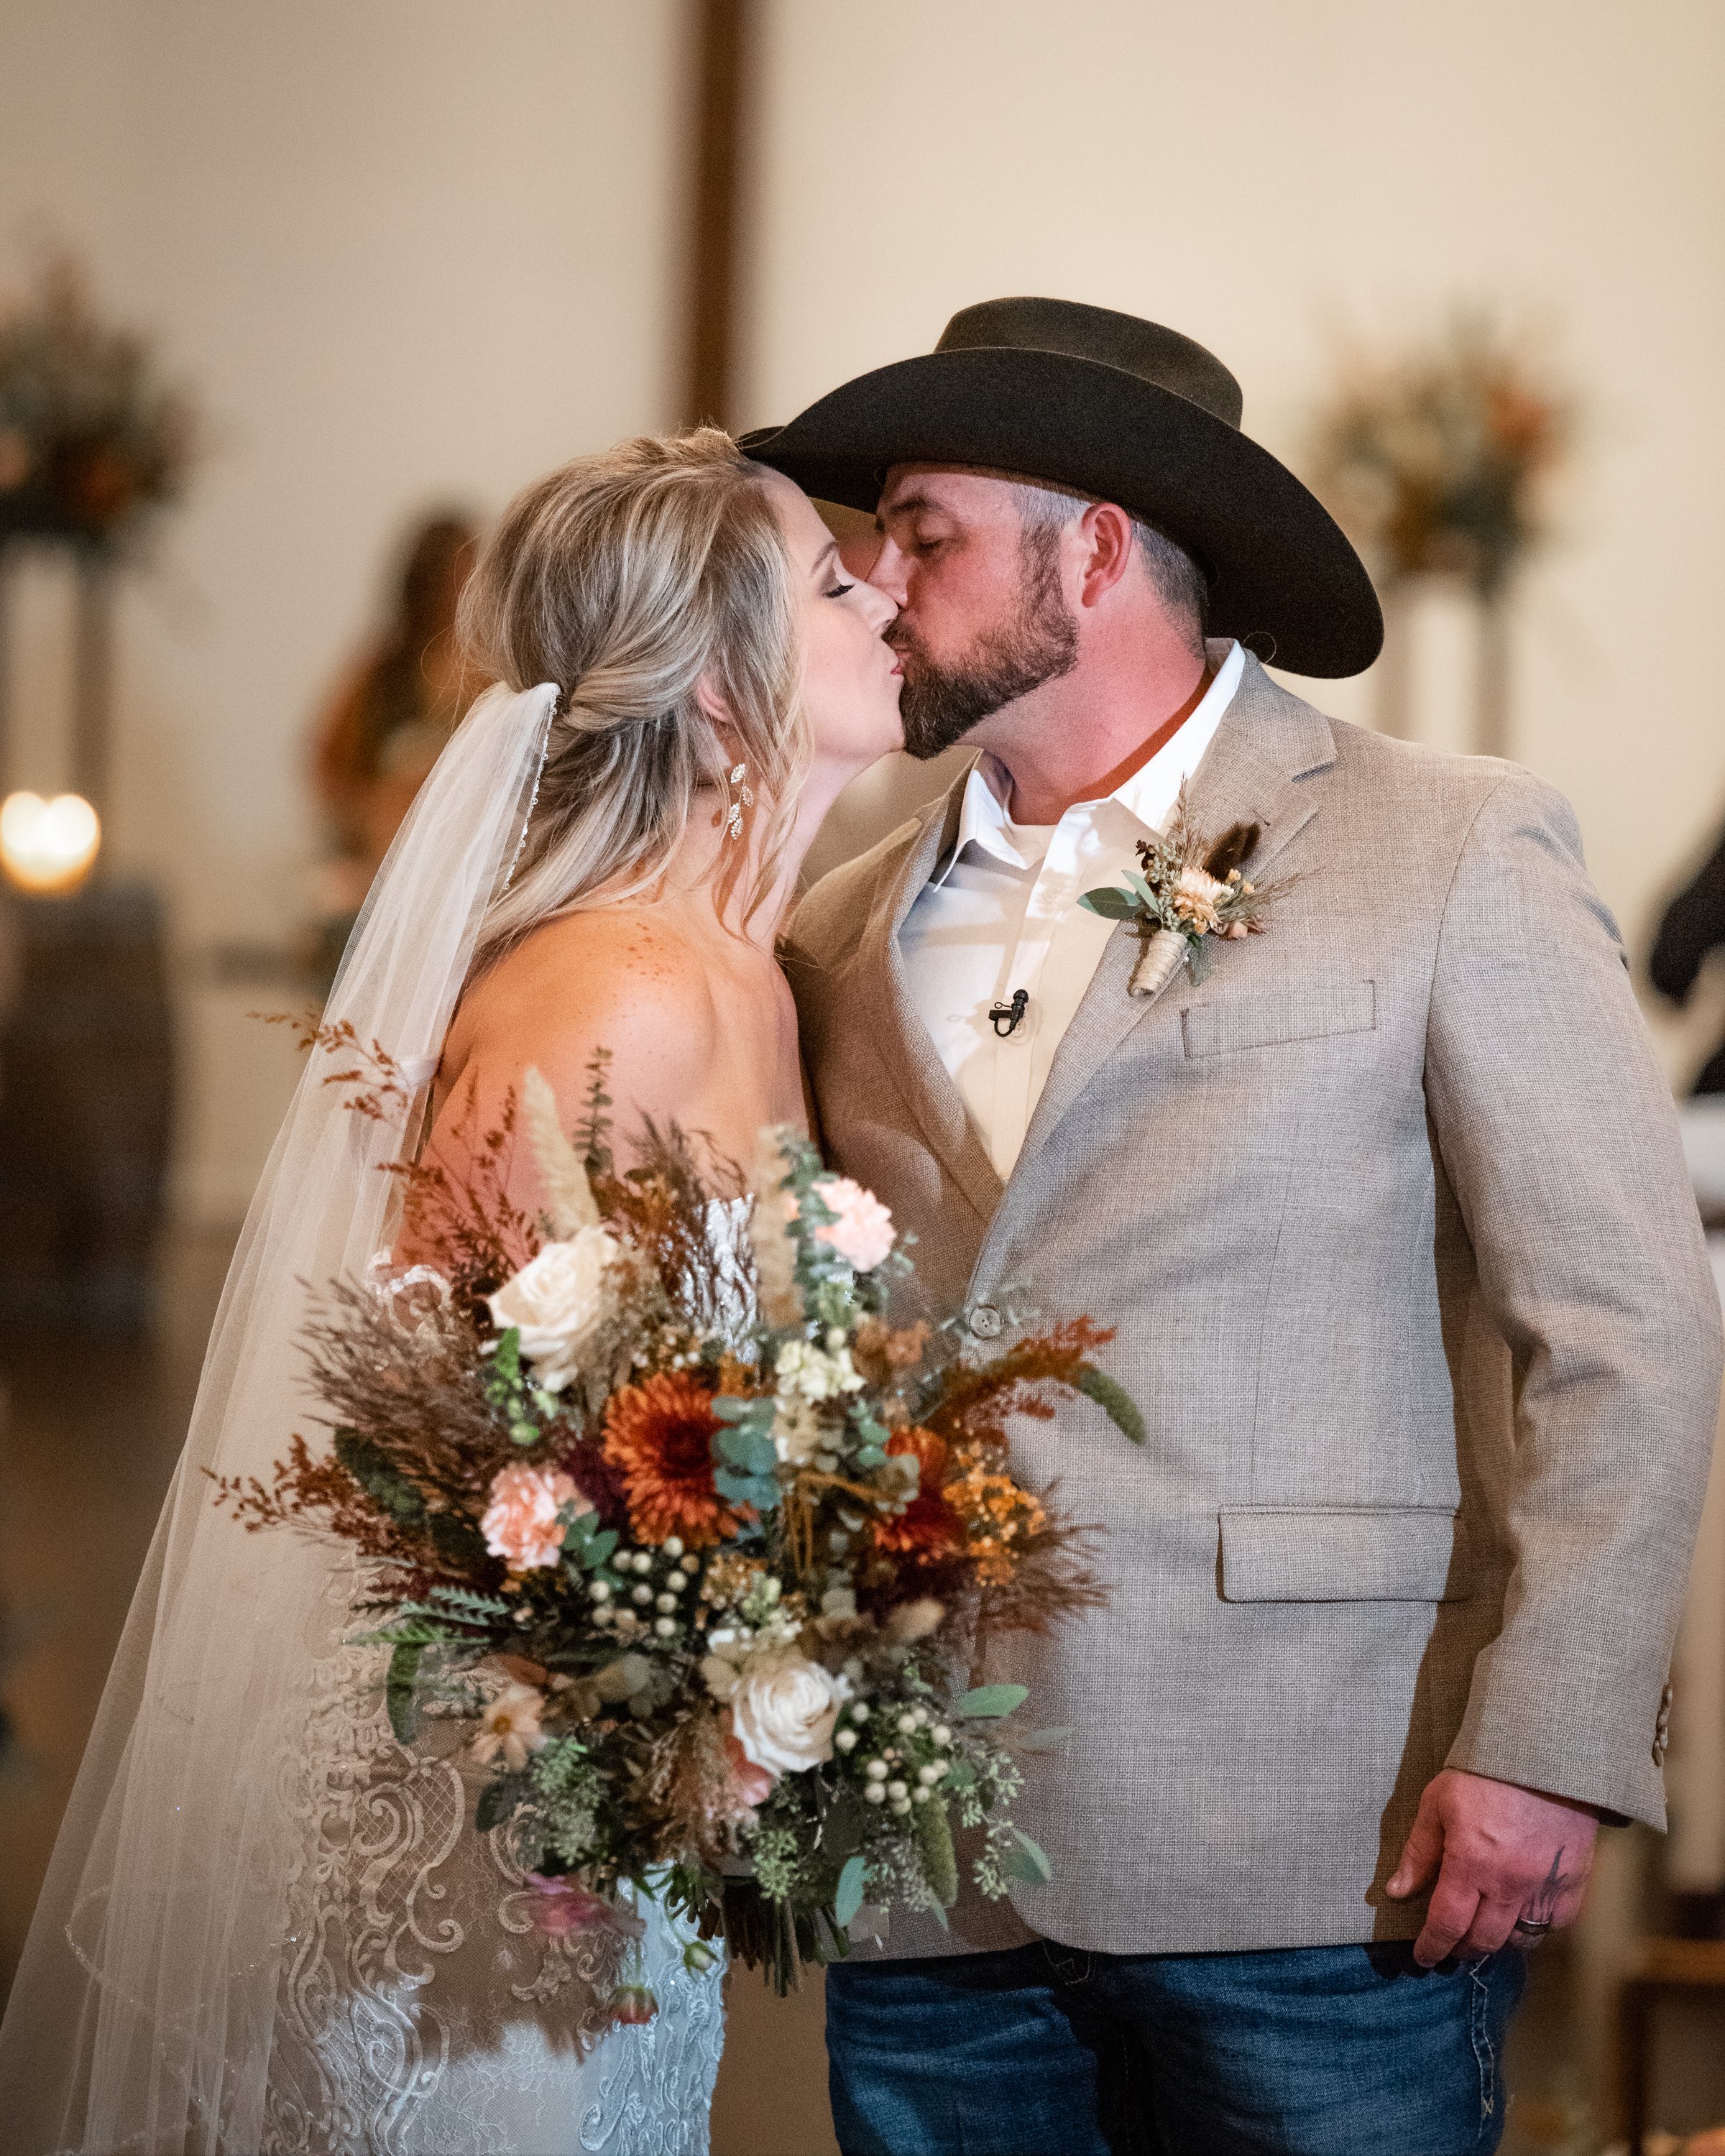  Central Texas Wedding Photographer Servicing Fort Worth to Houston and Beyond.  A few cities that we frequent, but aren’t limited to: Waco, Weatherford, College Station, Houston, Fort Worth. 